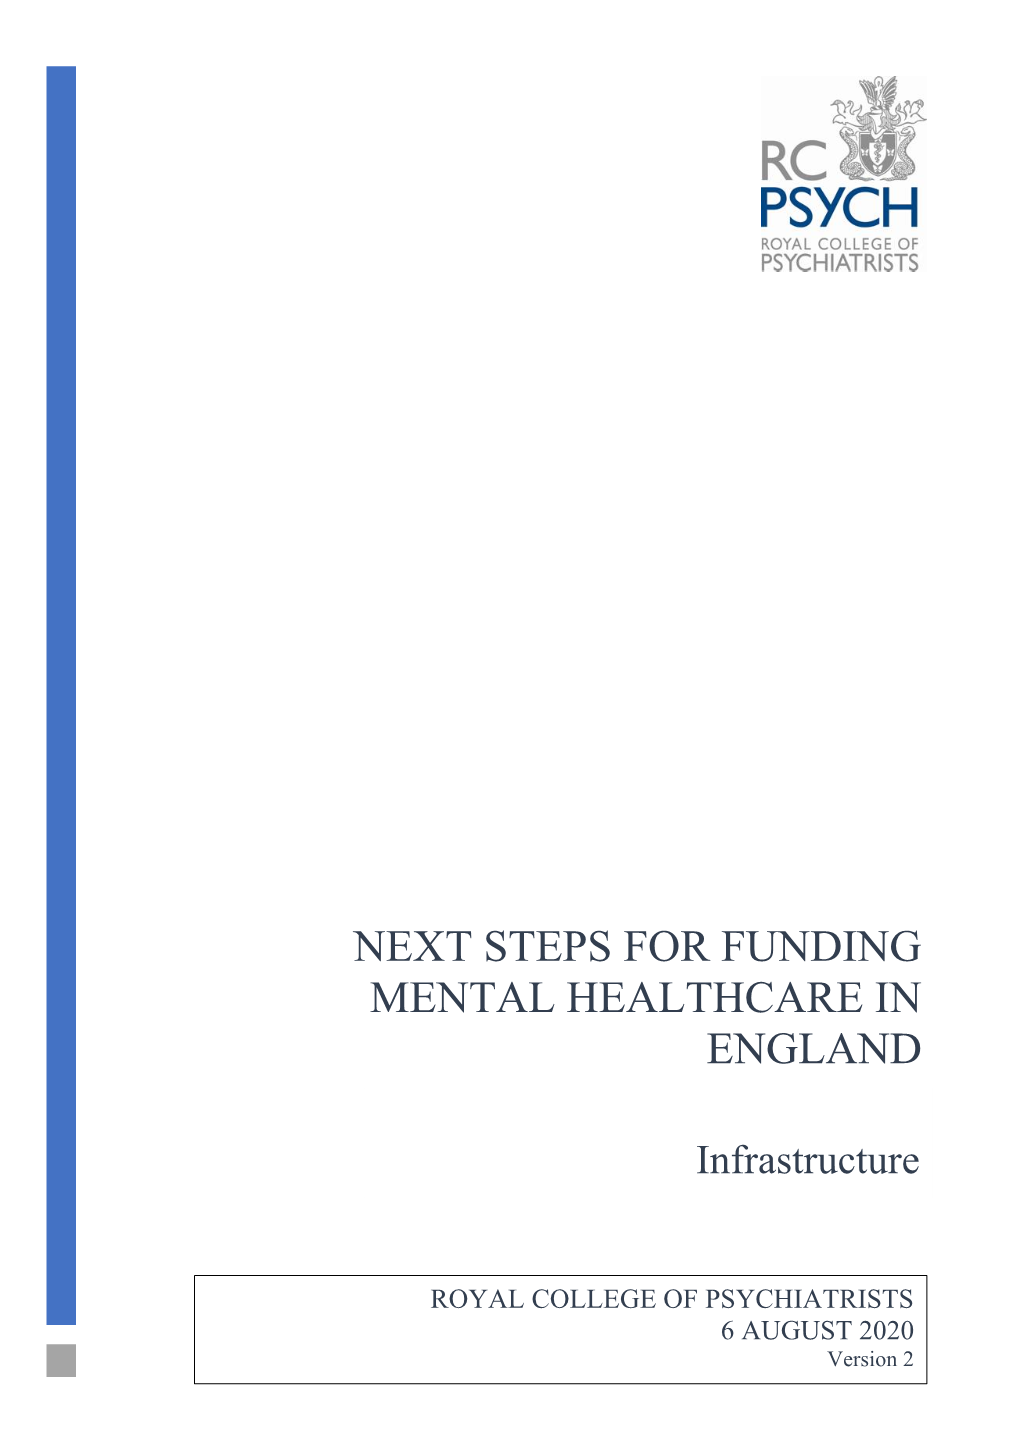 Next Steps for Funding Mental Healthcare in England